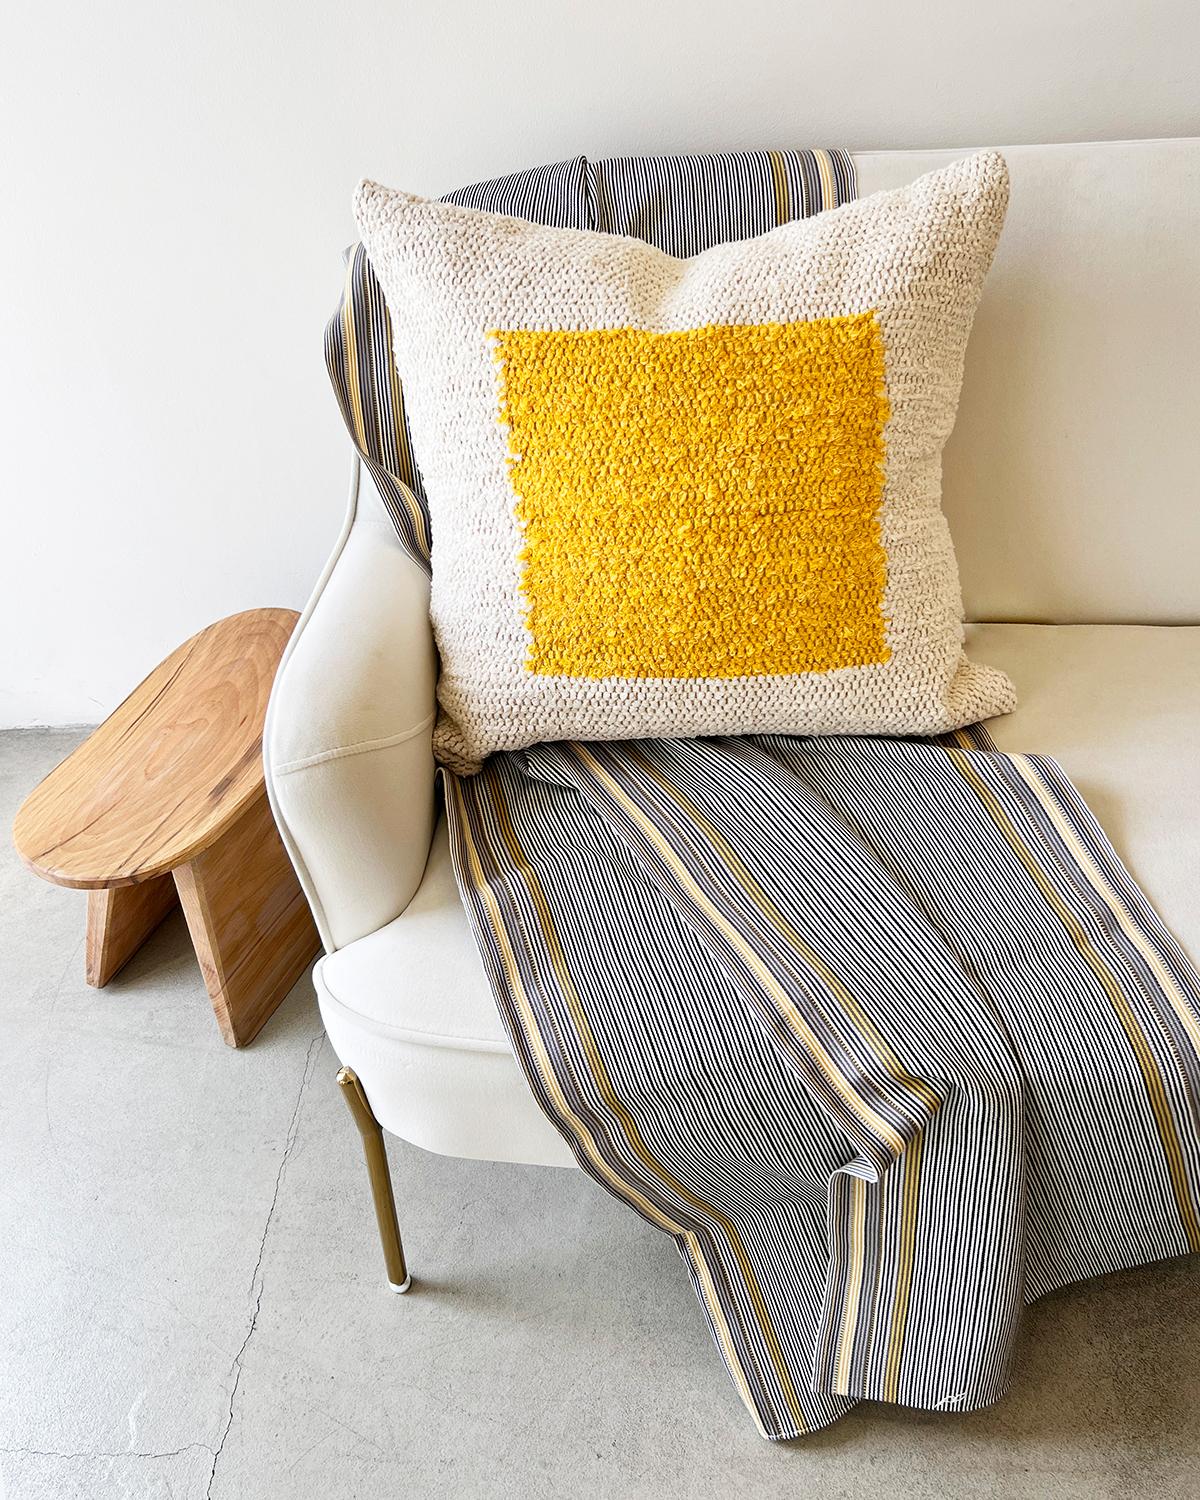 This stylish SanCri Cotton Throw will add a modern touch to any living space. Crafted from handmade, durable cotton and featuring a classic gray and yellow striped design, this throw is perfect for cozying up on the couch. Add a unique touch of